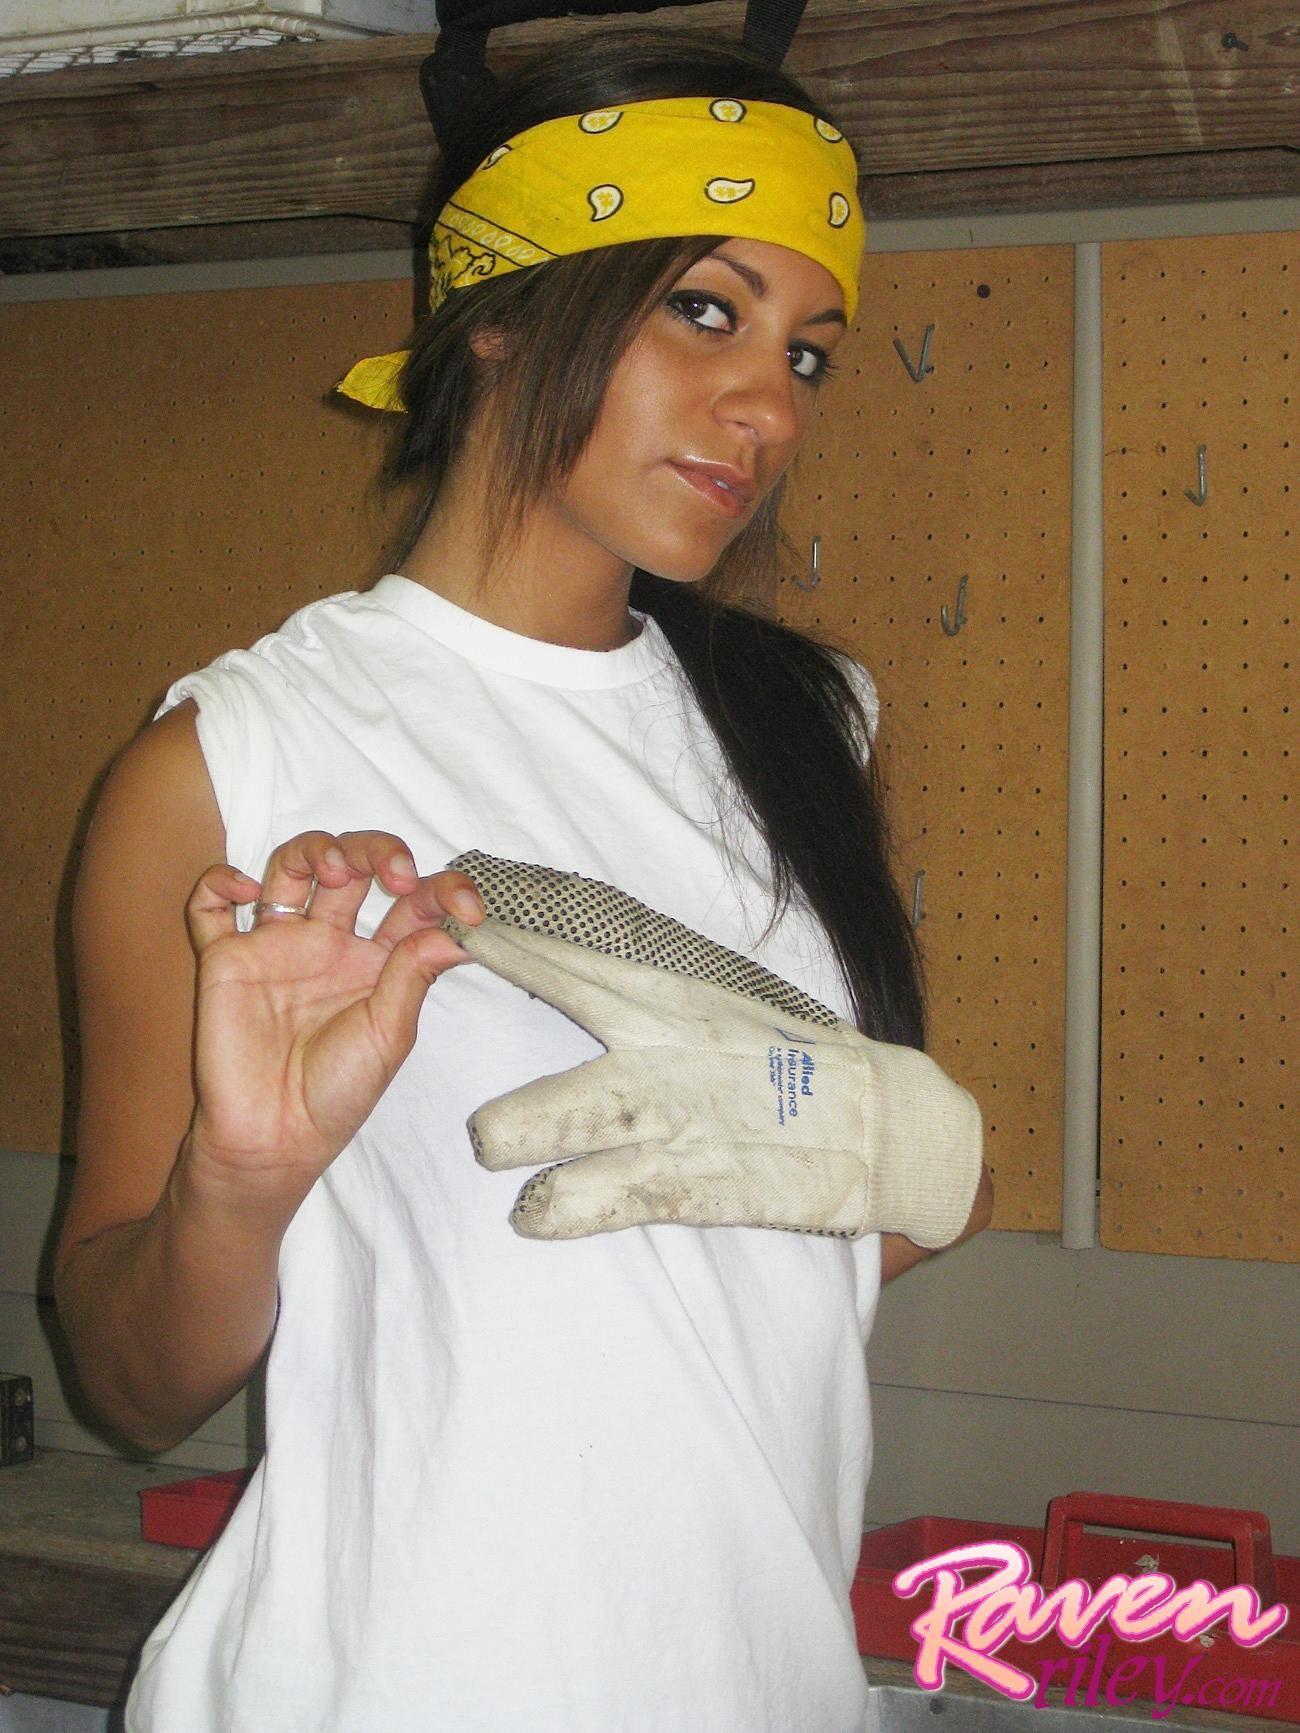 Pictures of Raven Riley doing some home renovations #59854929